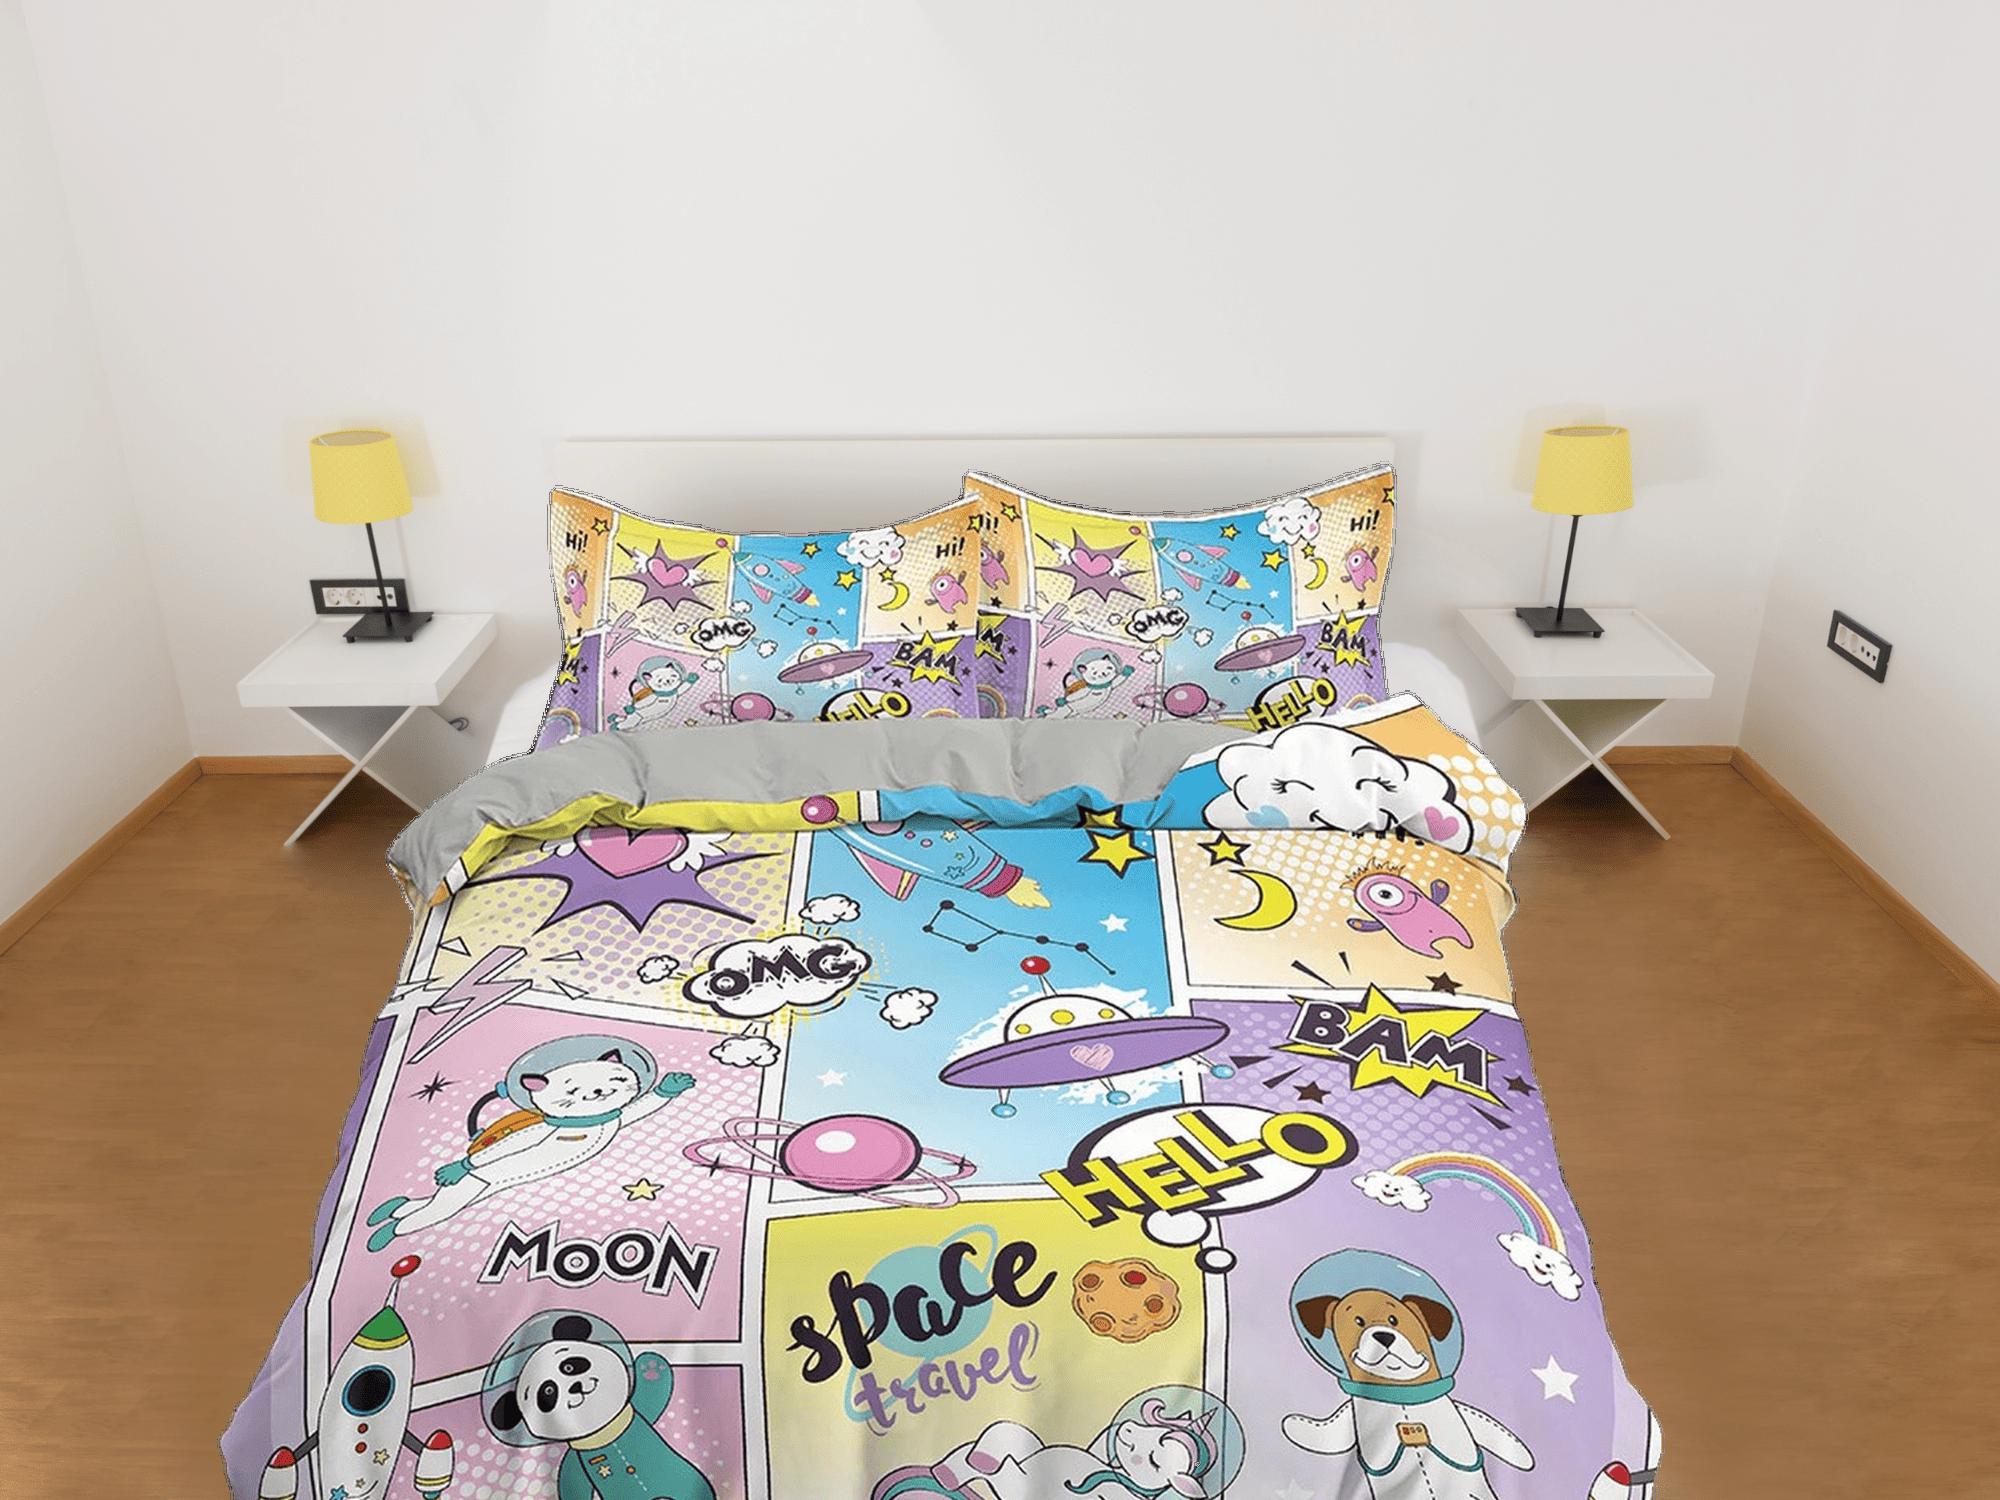 daintyduvet Astro panda and bear comics pastel colored toddler bedding, unique duvet cover kids, crib bedding, baby zipper bedding, king queen full twin